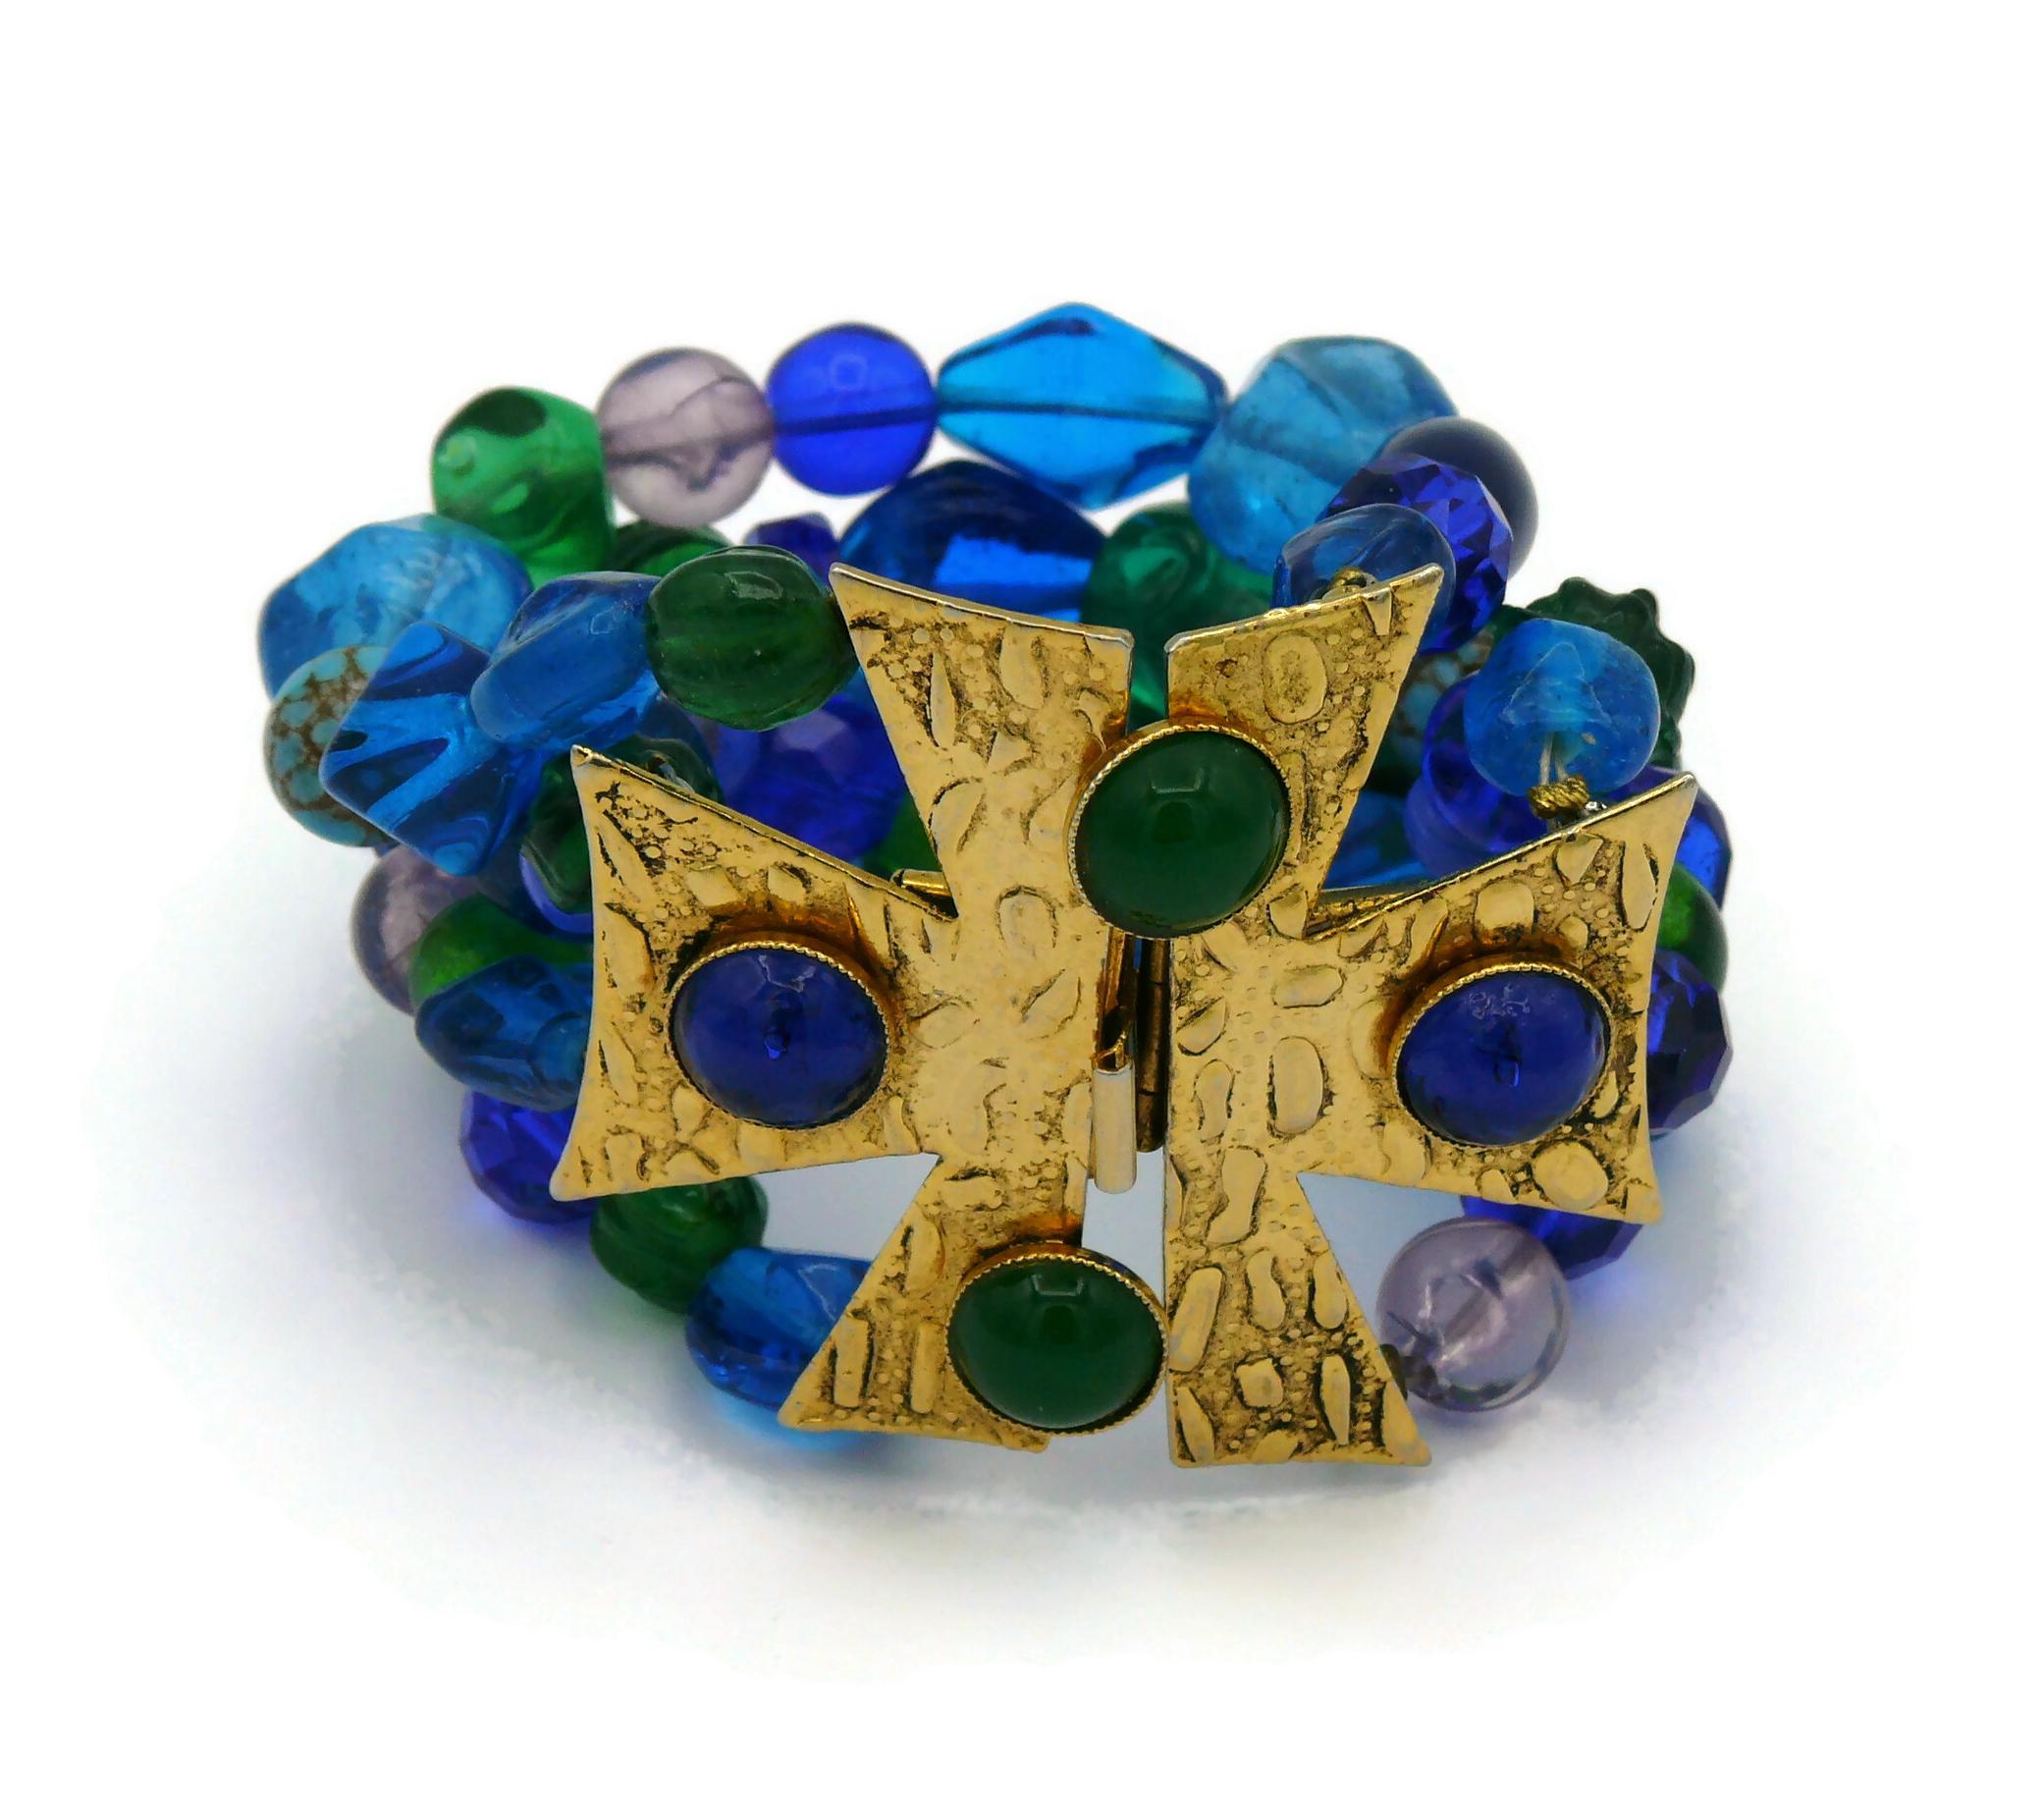 PHILLIPE FERRANDIS vintage textured gold tone Maltese cross cuff bracelet featuring multicolor glass and resin beads.

Push clasp closure.

Marked PHILIPPE FERRANDIS Paris.

Indicative measurements : length approx. 18.5 cm (7.28 inches) / width